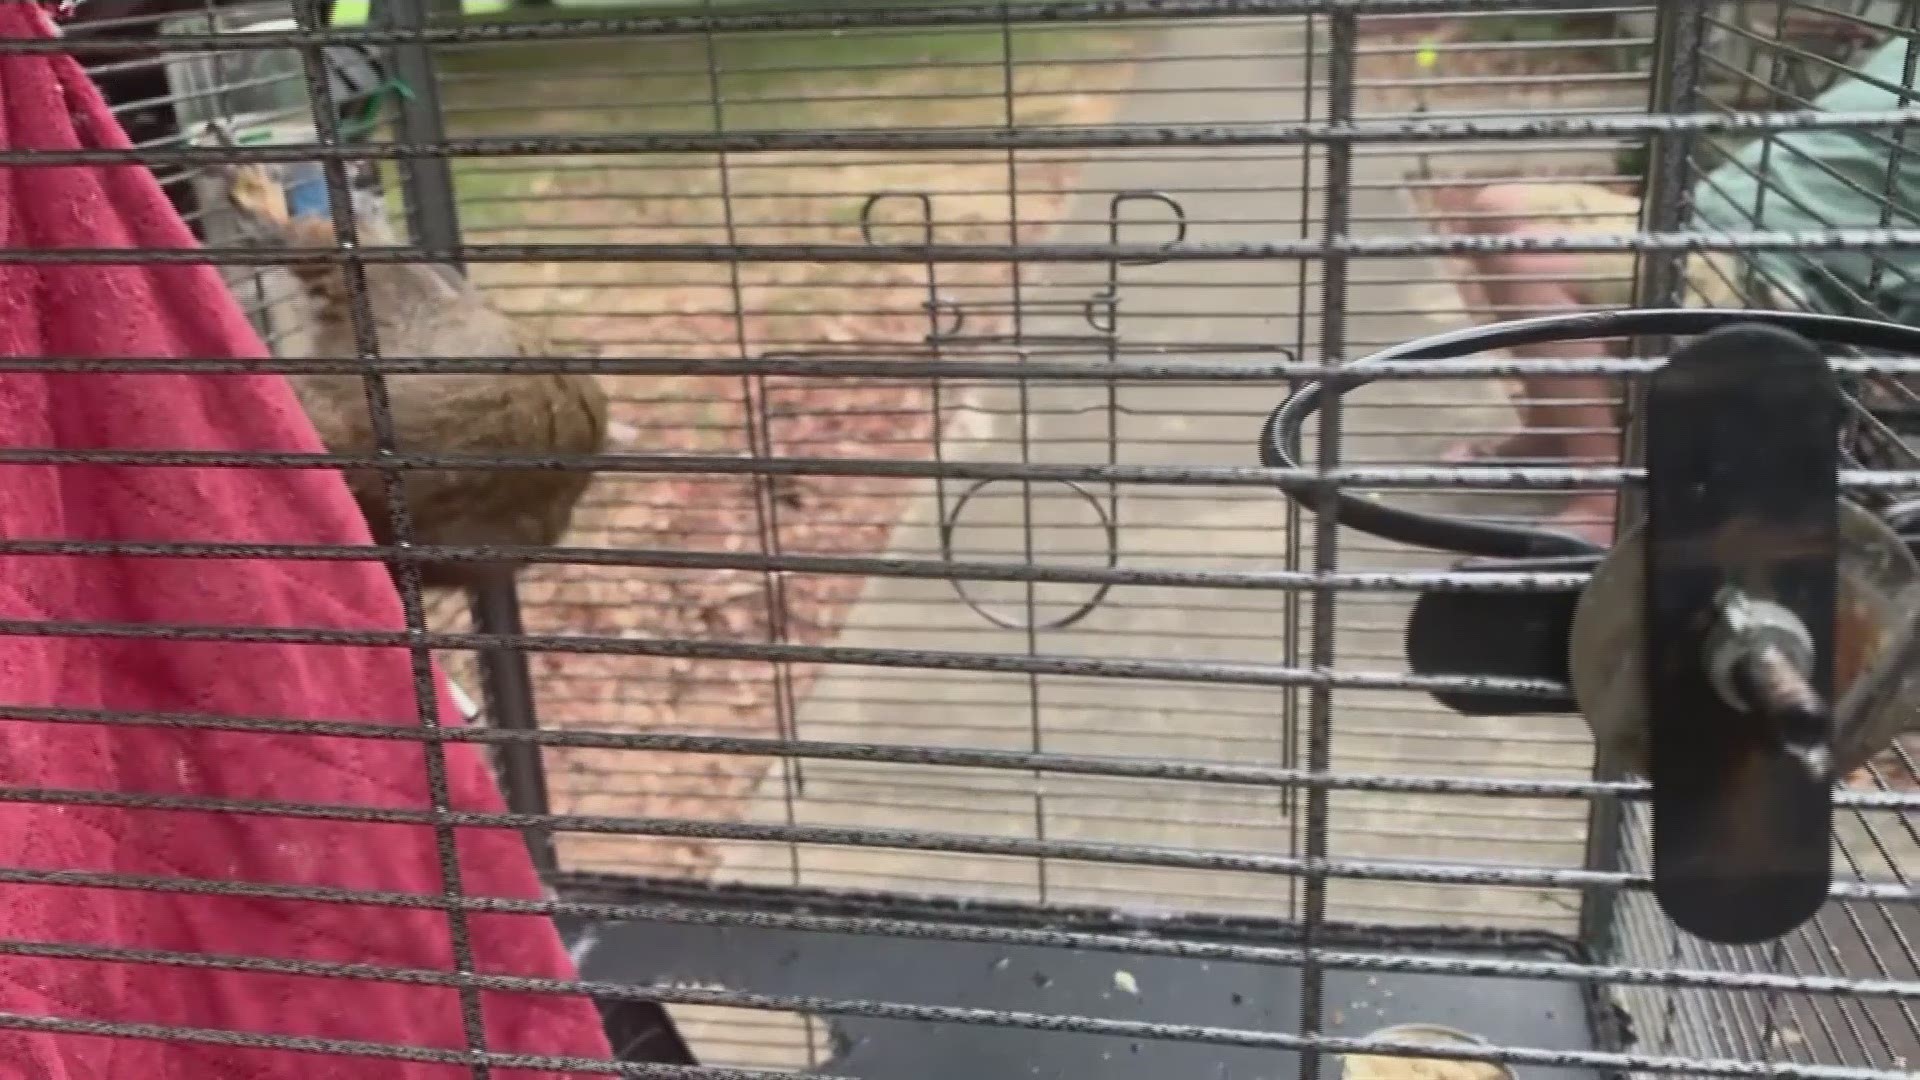 Alabama investigators say a man kept a caged 'attack squirrel' in his apartment and fed it methamphetamine to ensure it stayed aggressive. (AP)